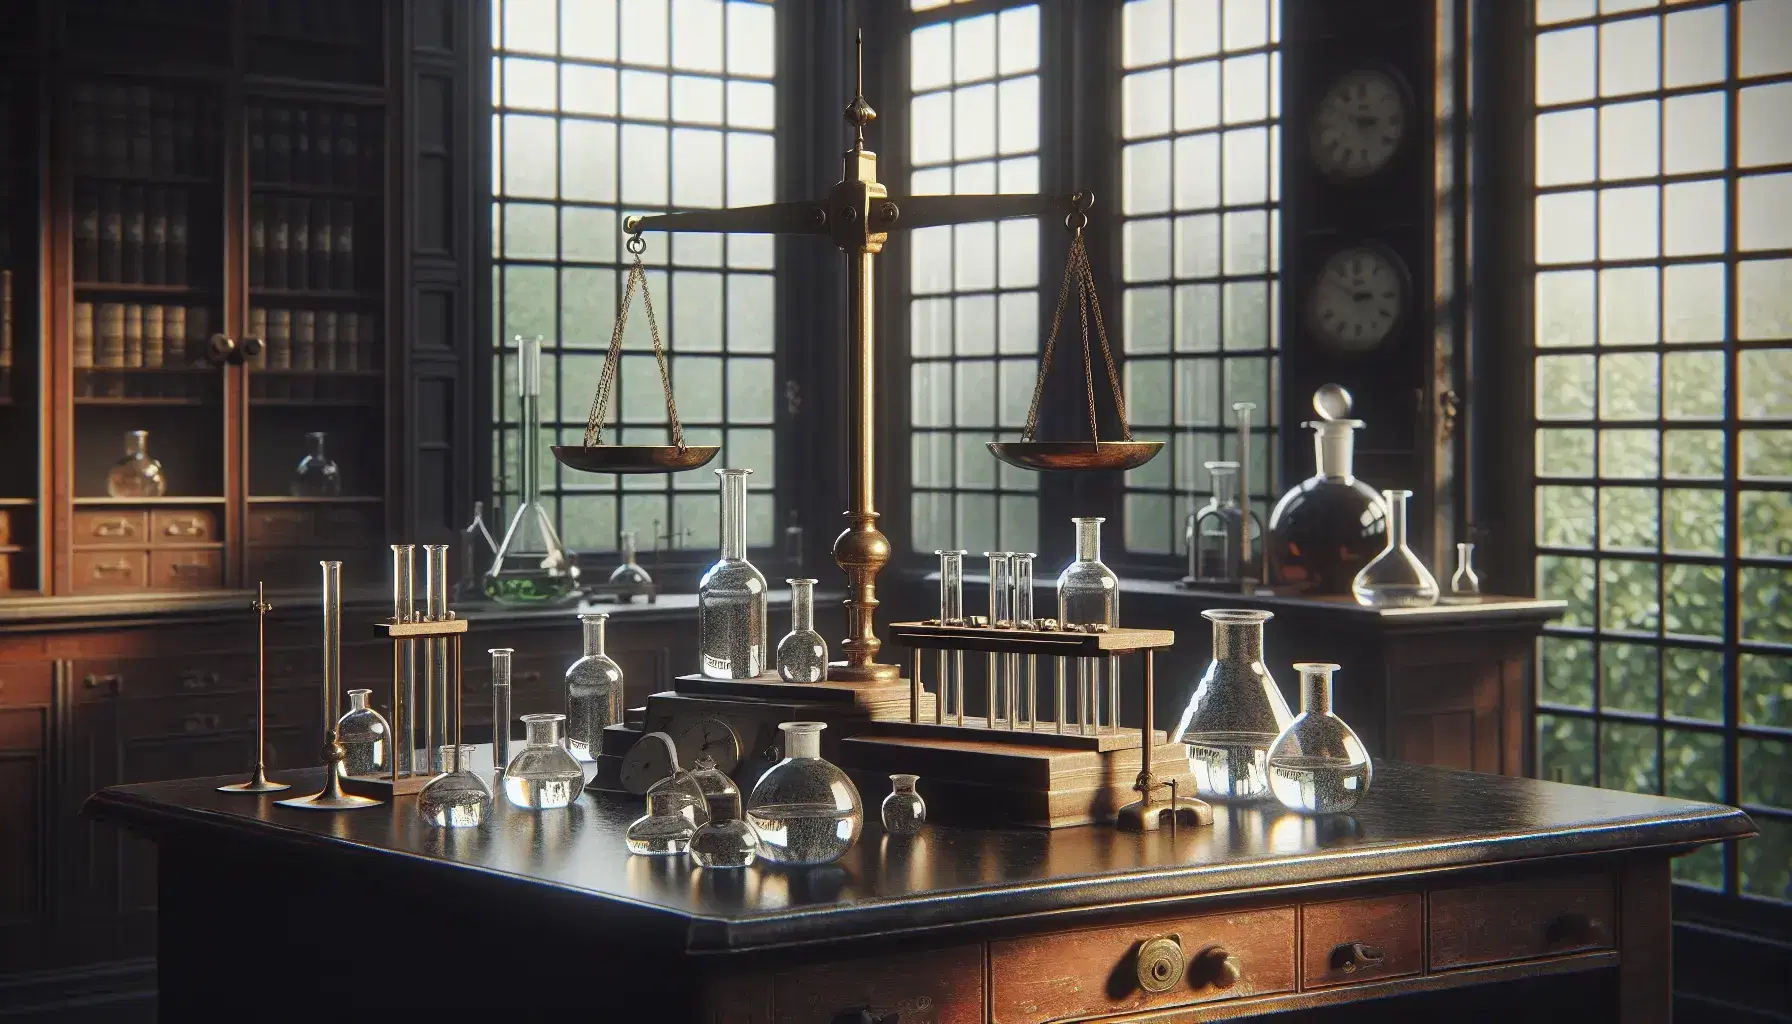 Historic science laboratory with wooden table, brass scales, shiny weights and glassware on illuminated window background.